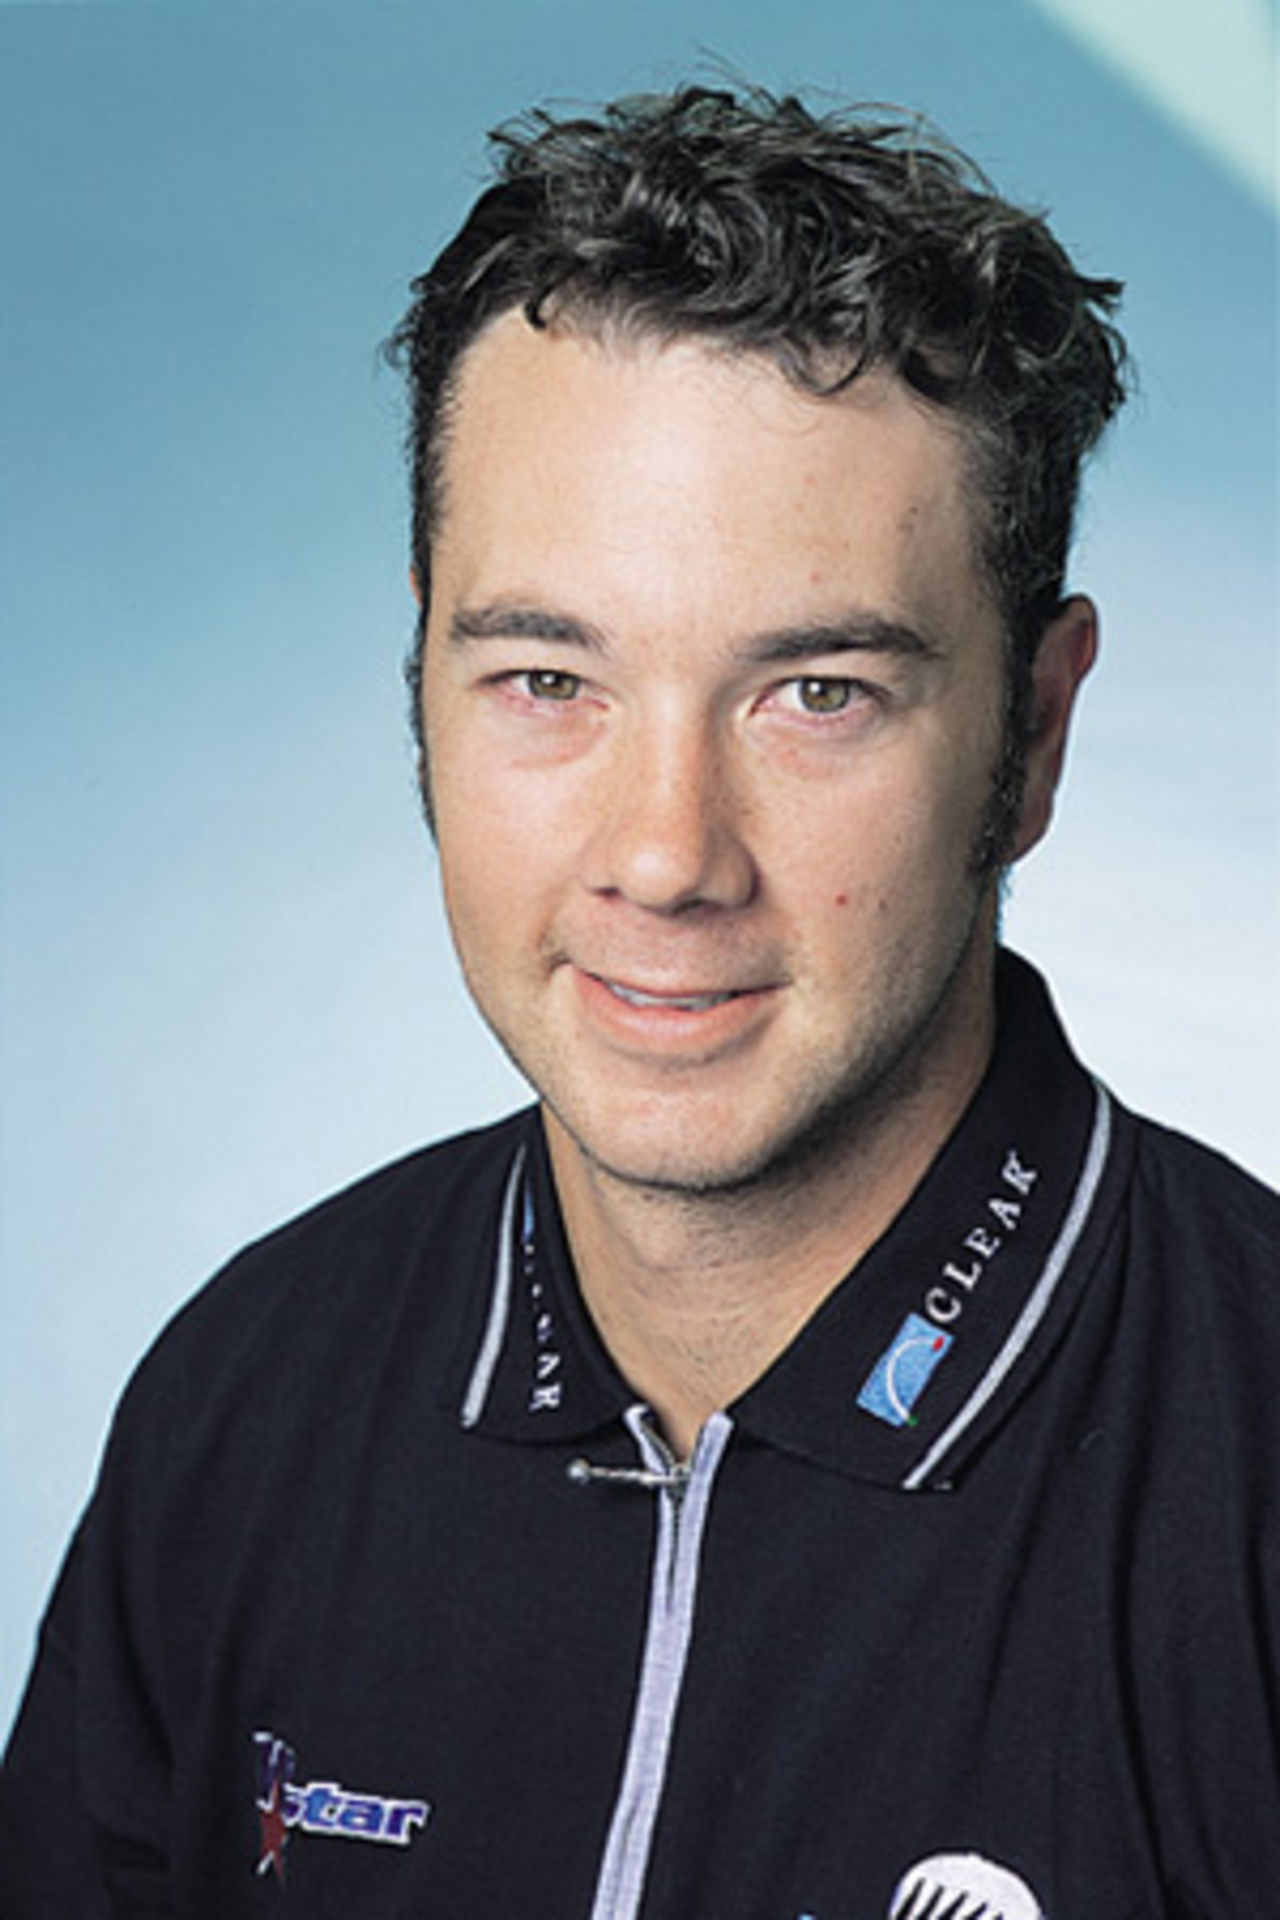 Portrait of Craig McMillan - New Zealand player in the 2001/02 season.